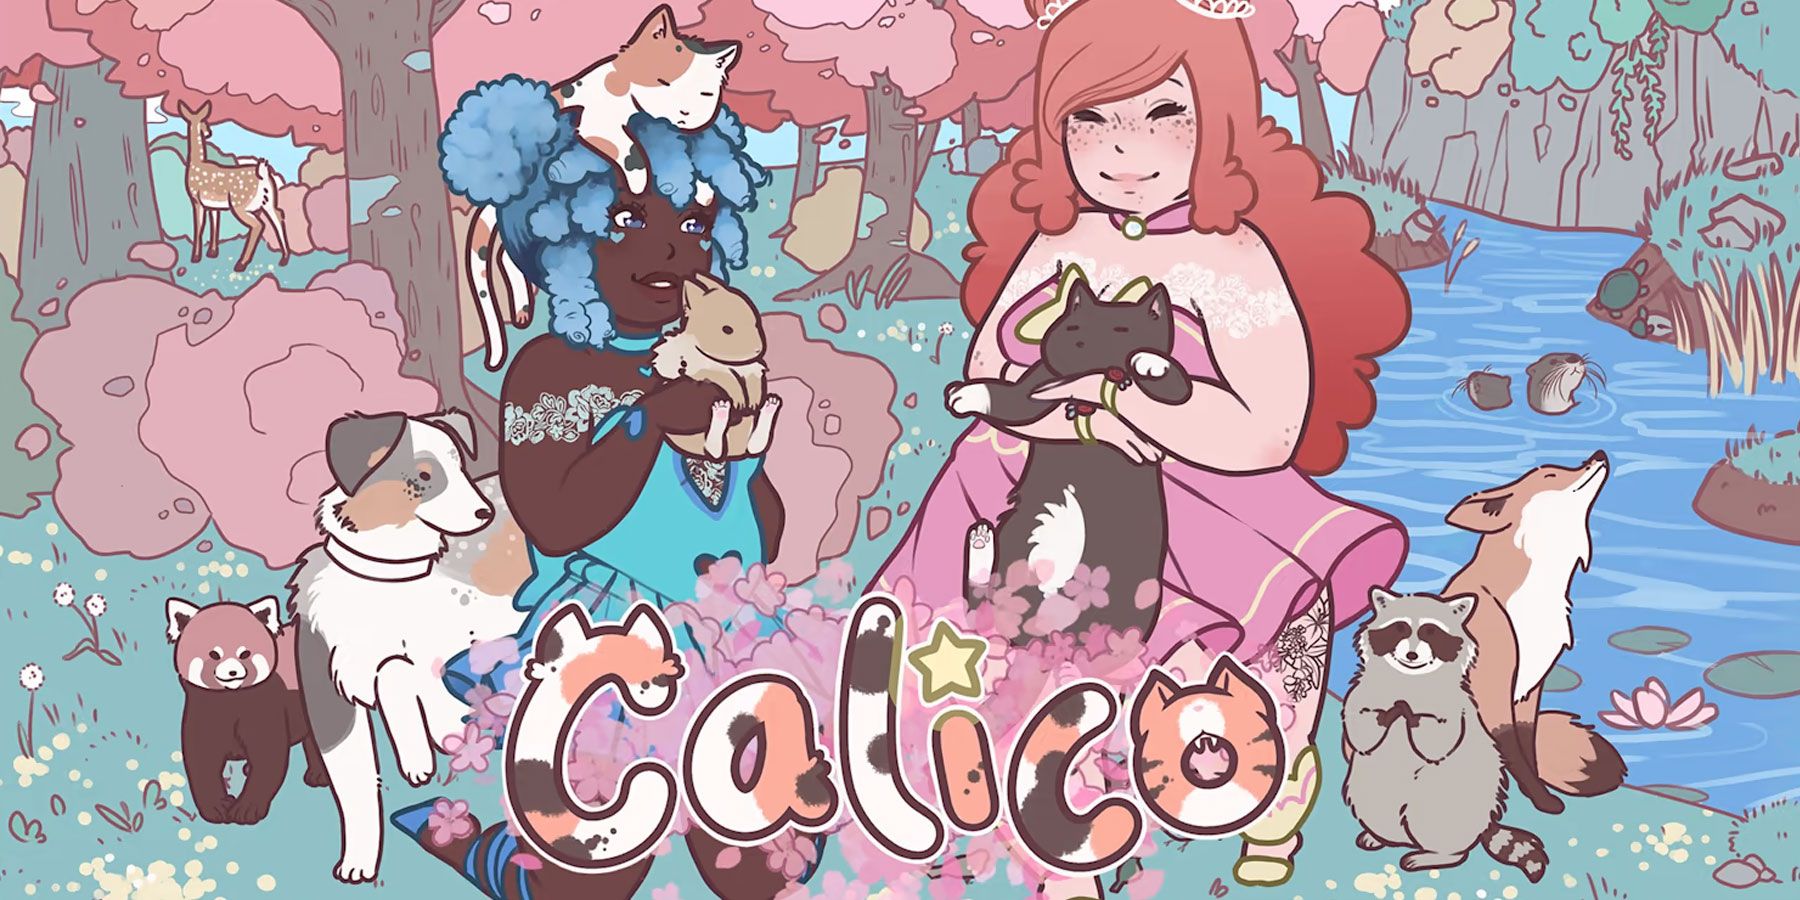 calico-video-game-chracters-playing-with-various-types-of-cats